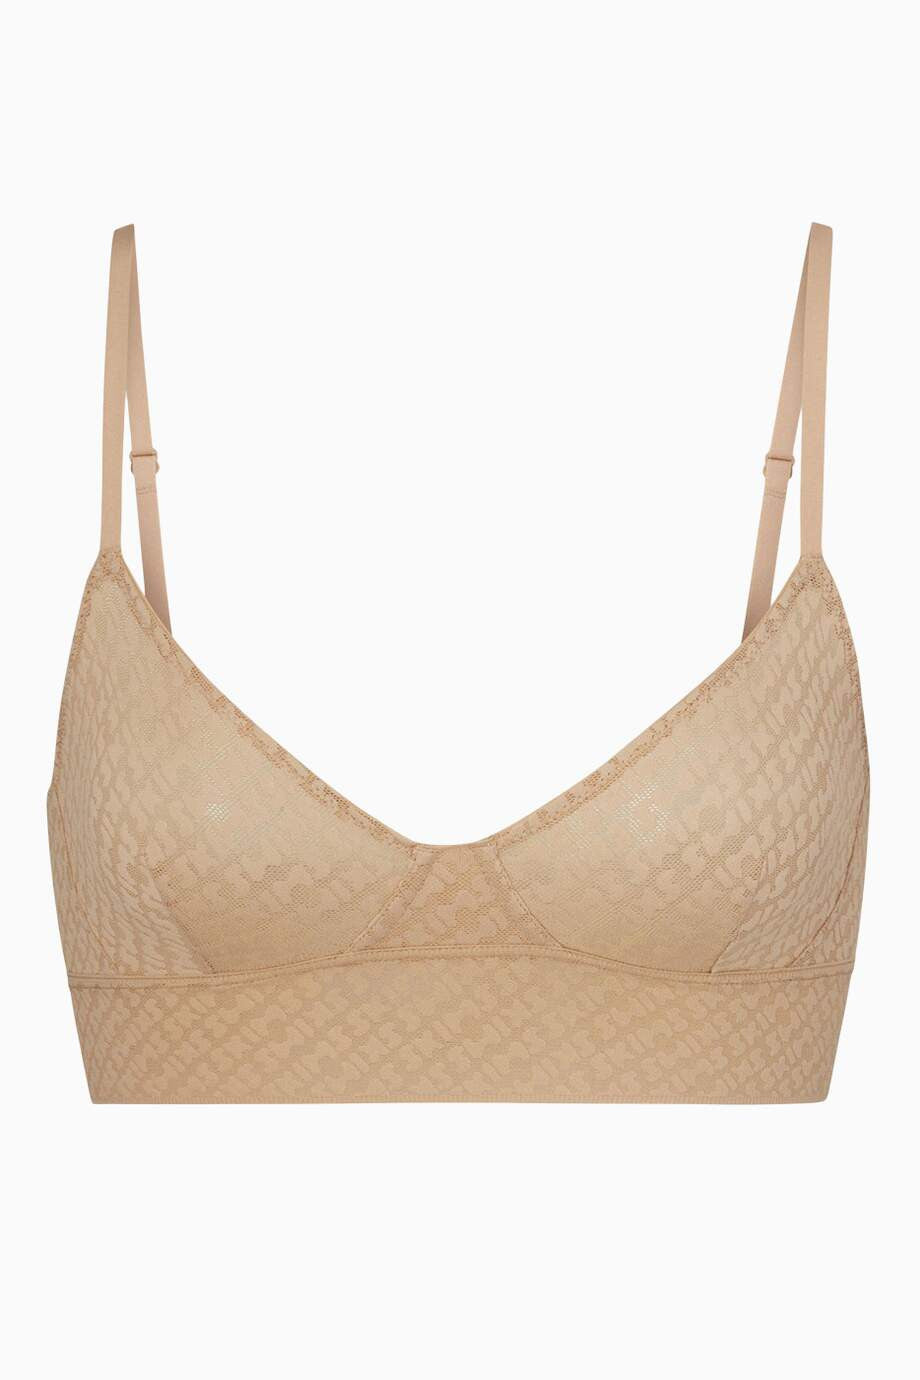 SKIMS Logo Mesh Triangle Bralette – Luxe by Kan